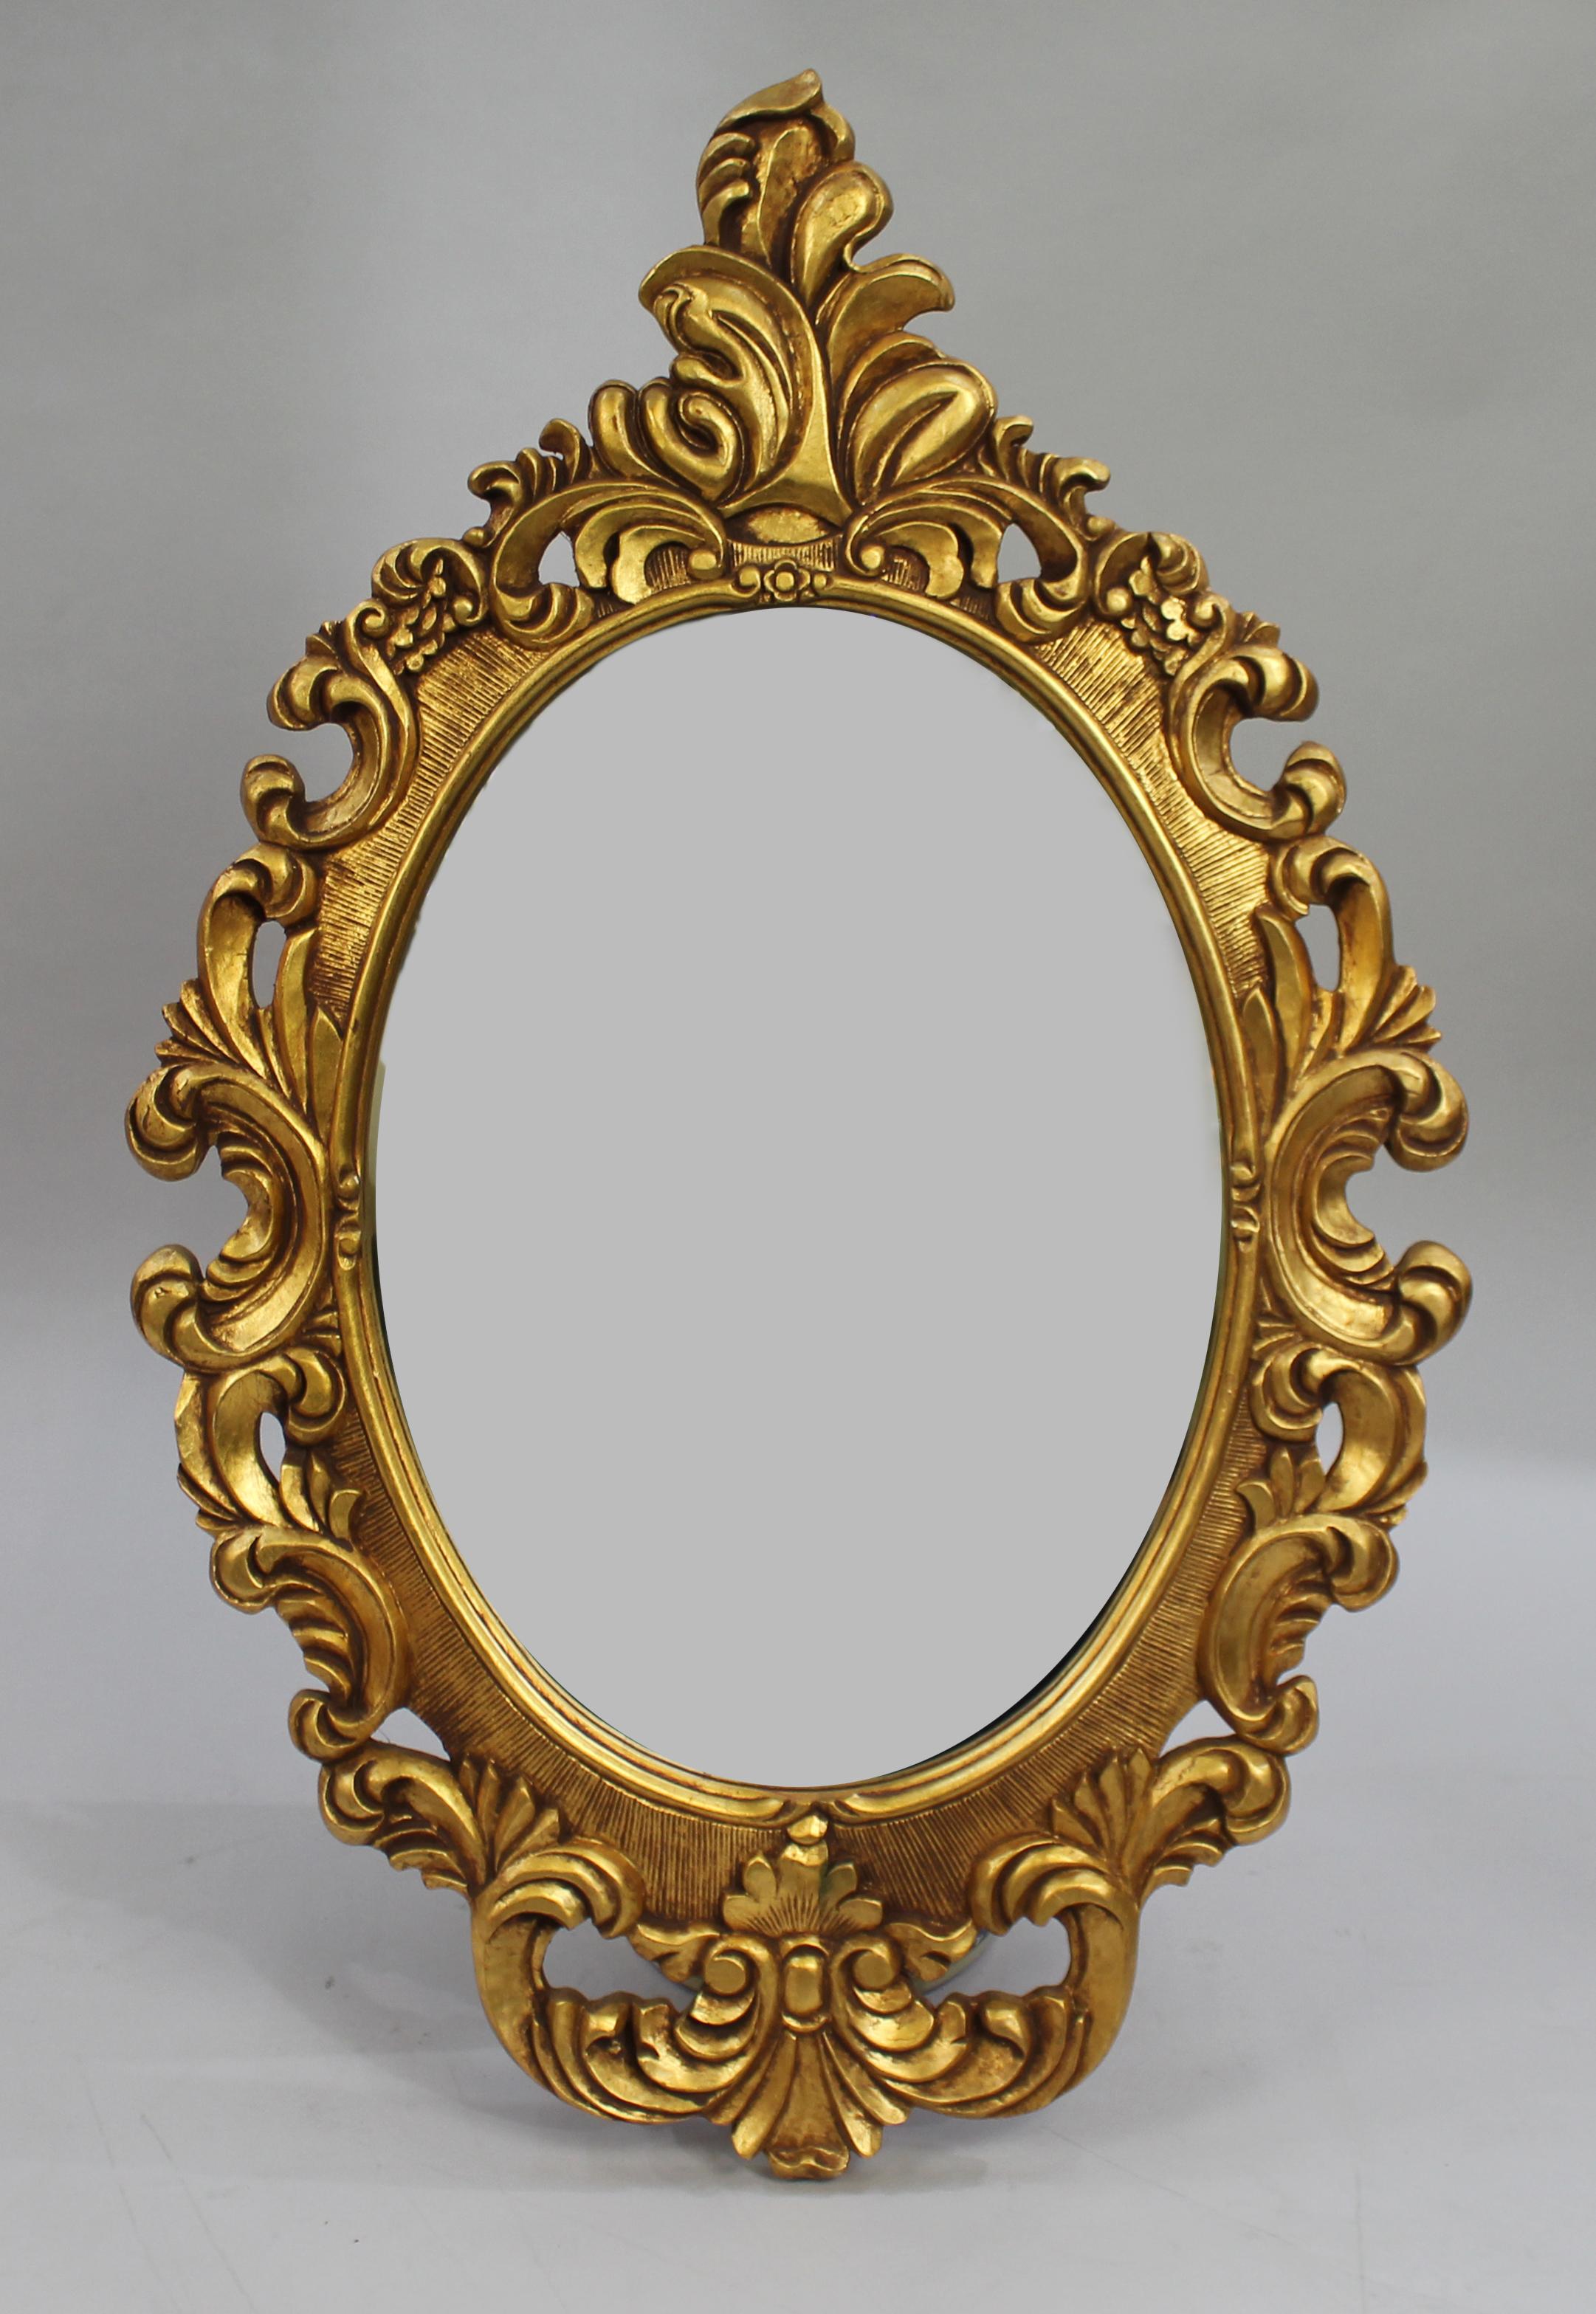 Carved giltwood wall mirror


Hand carved wooden frame with gold leaf finish.

Oval mirror plate.

French manner, 1980's.

Very good condition with little wear to gold leaf only. Ready to hang

Measures 60 x 94 cm.